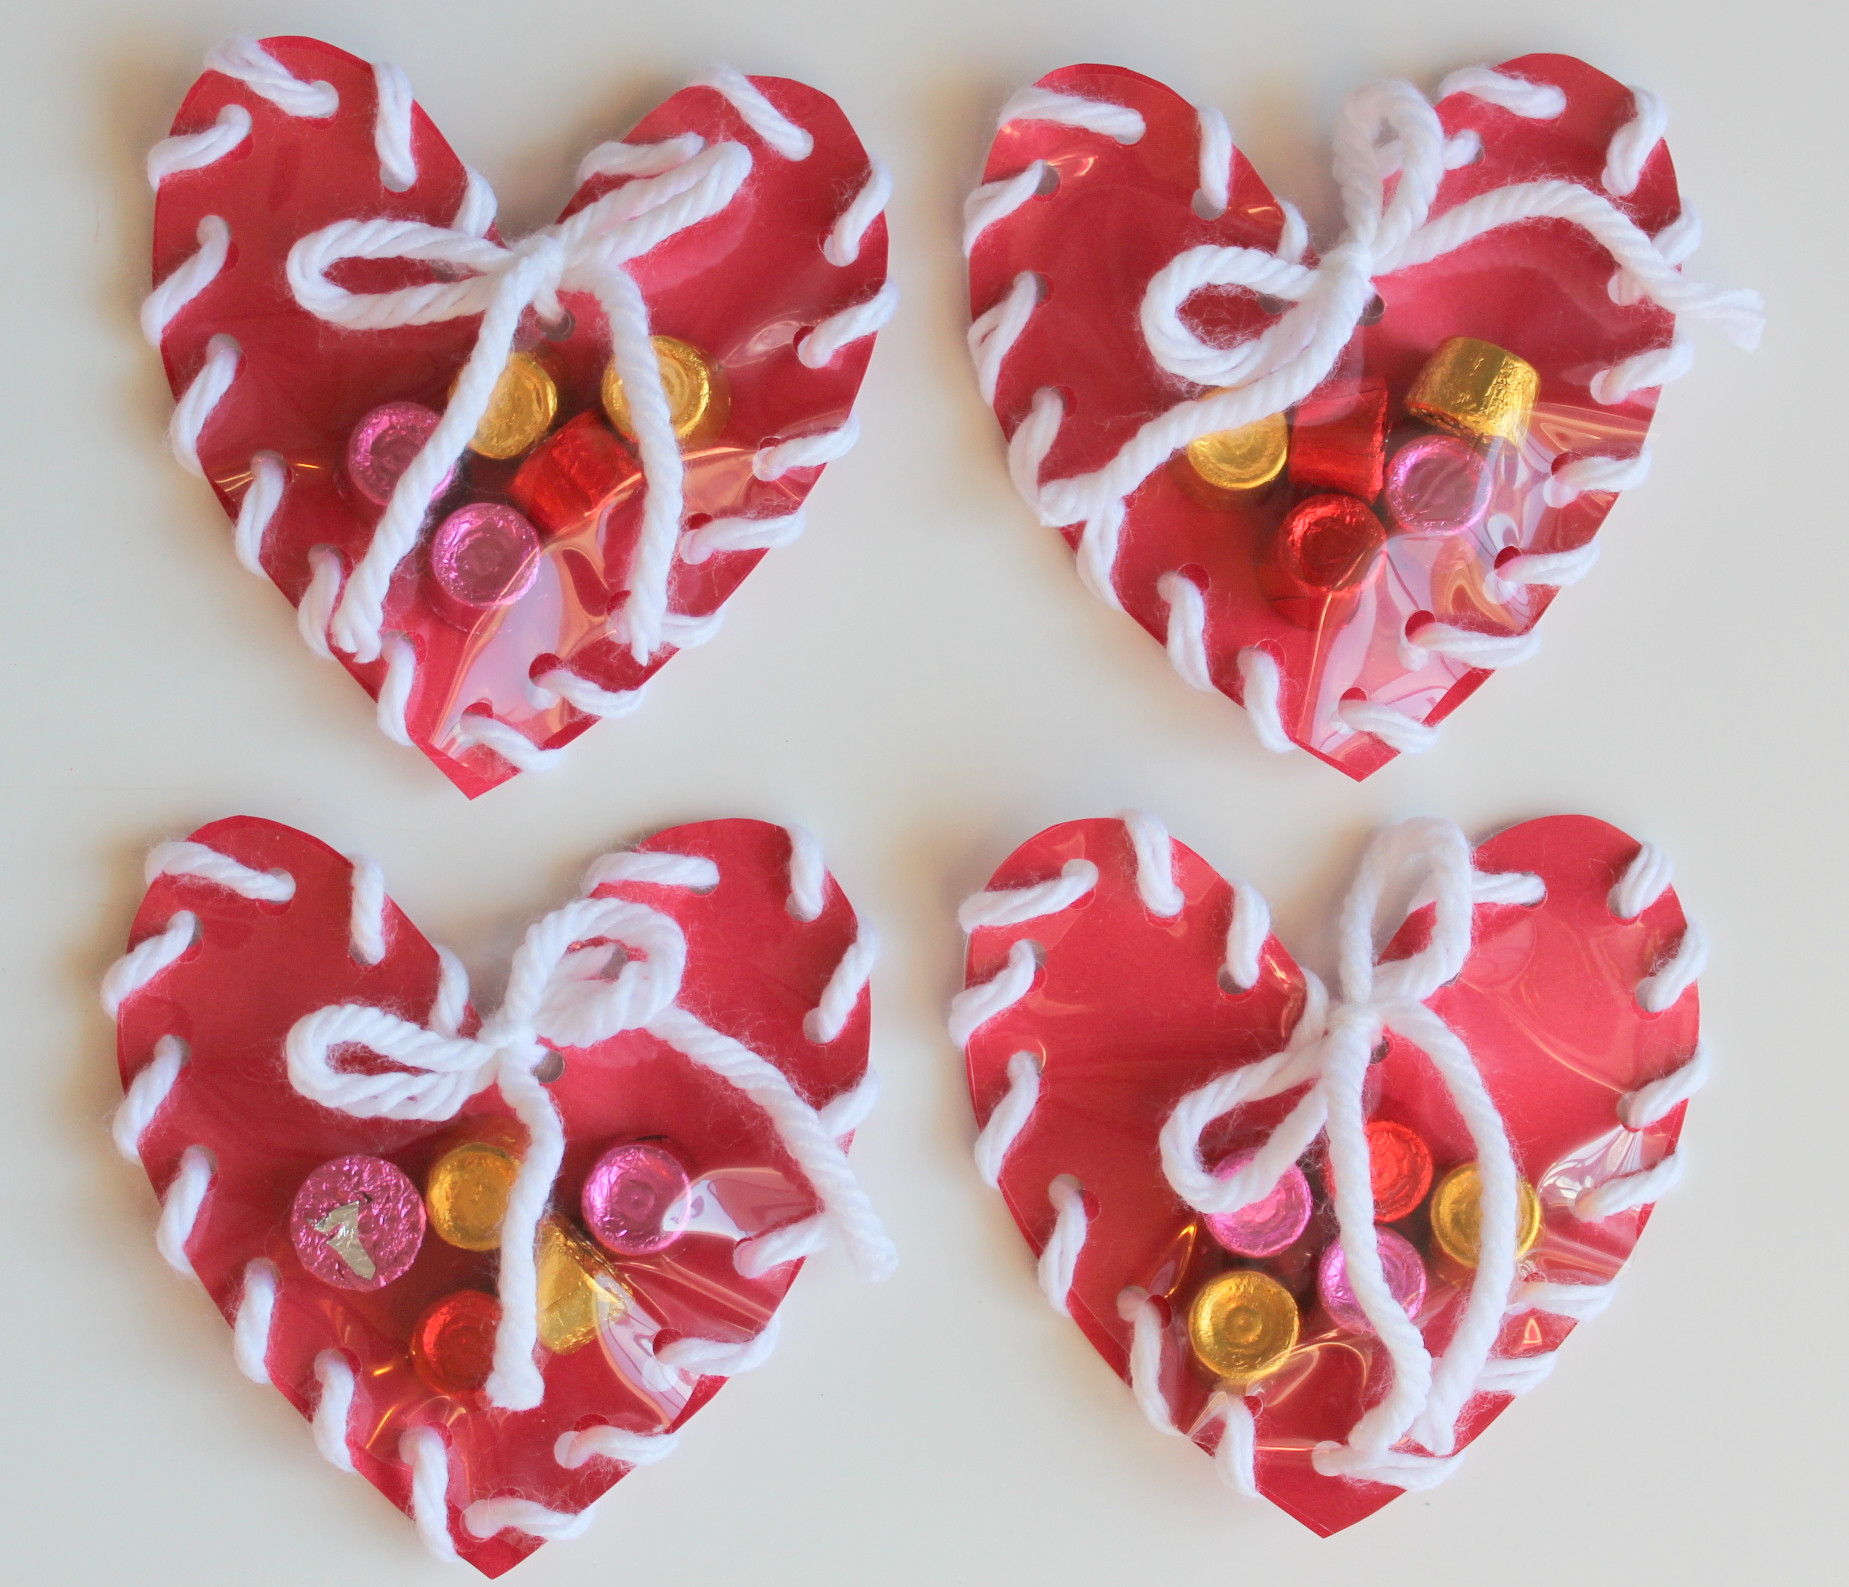 Valentines Day Ideas For Kids
 Lollydot Hand Sewn Paper Heart Valentine Craft for Kids